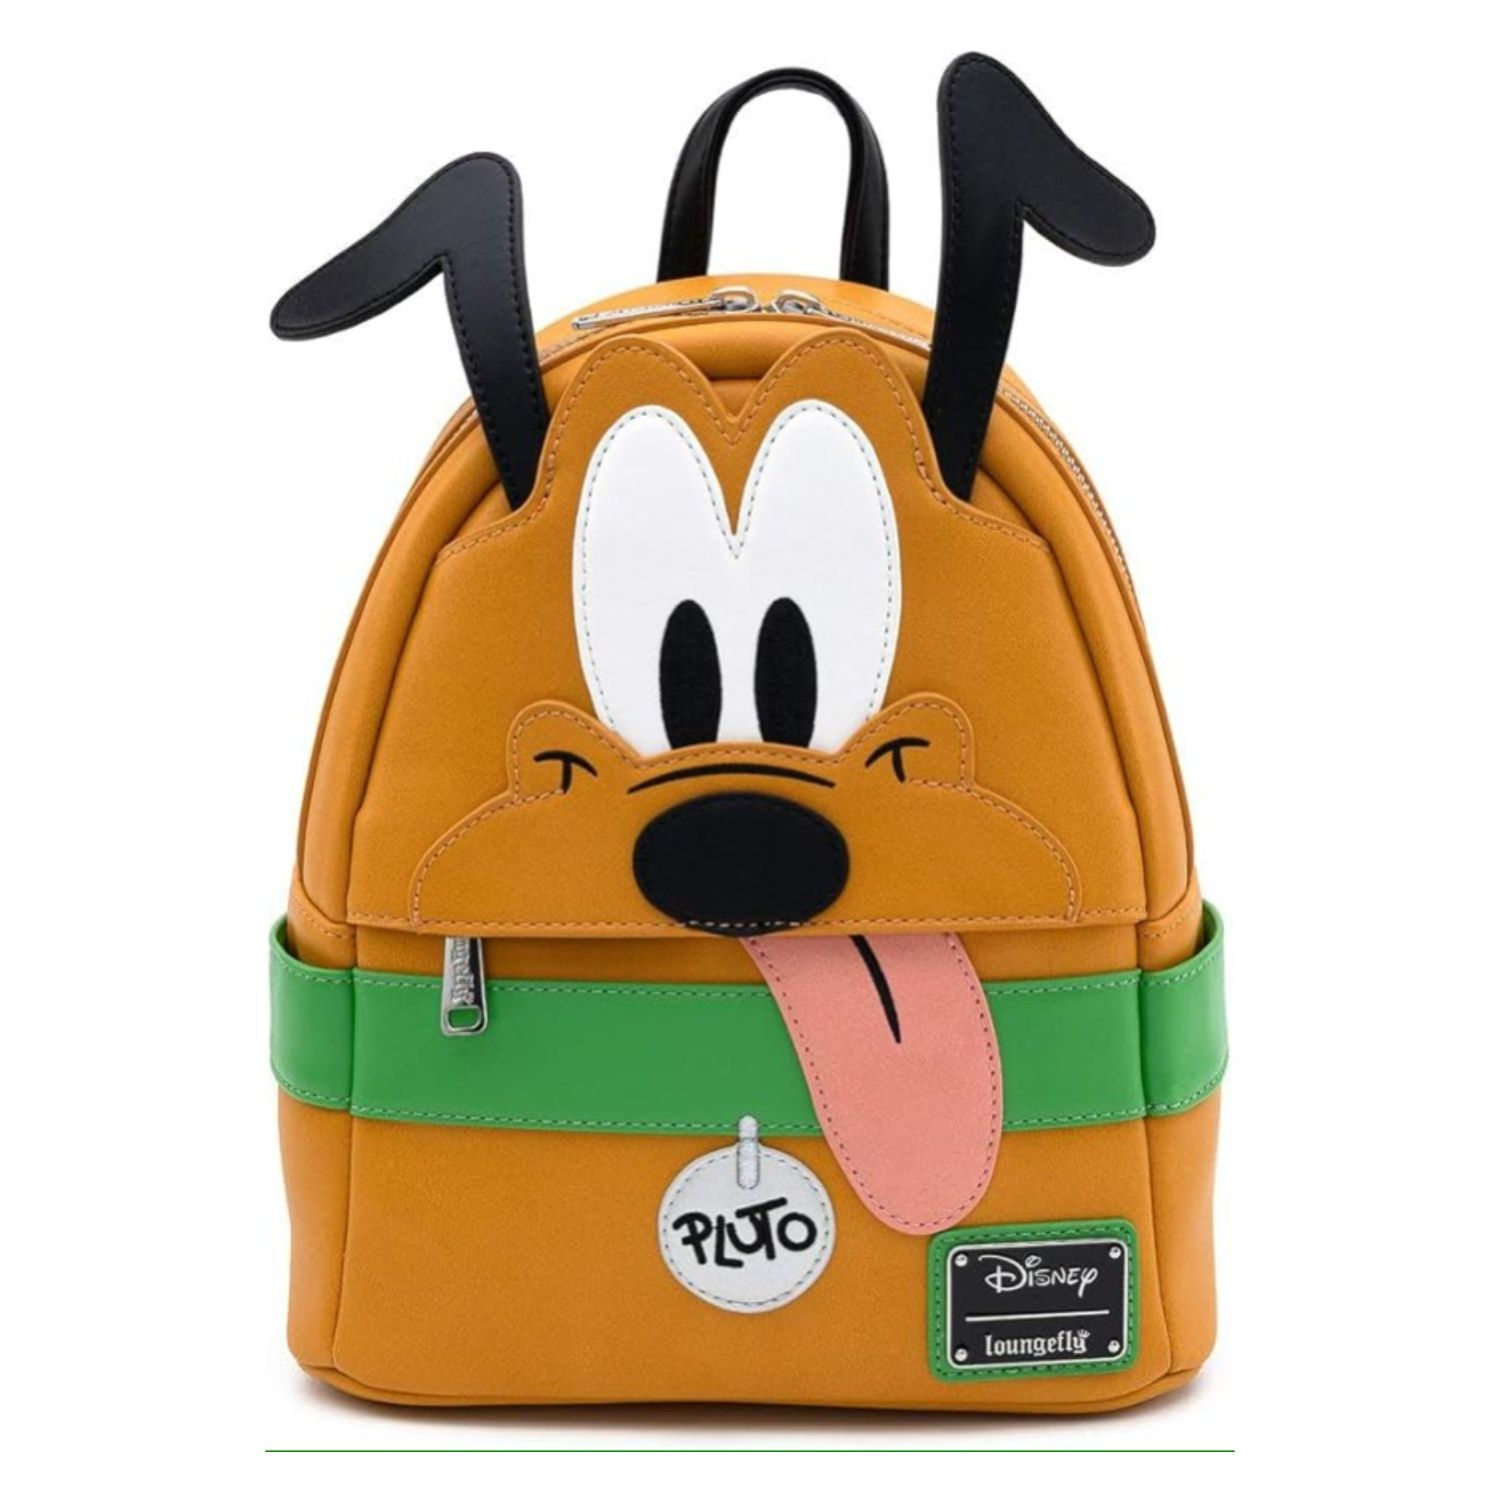 This brown backpack is made to look like Pluto the dog